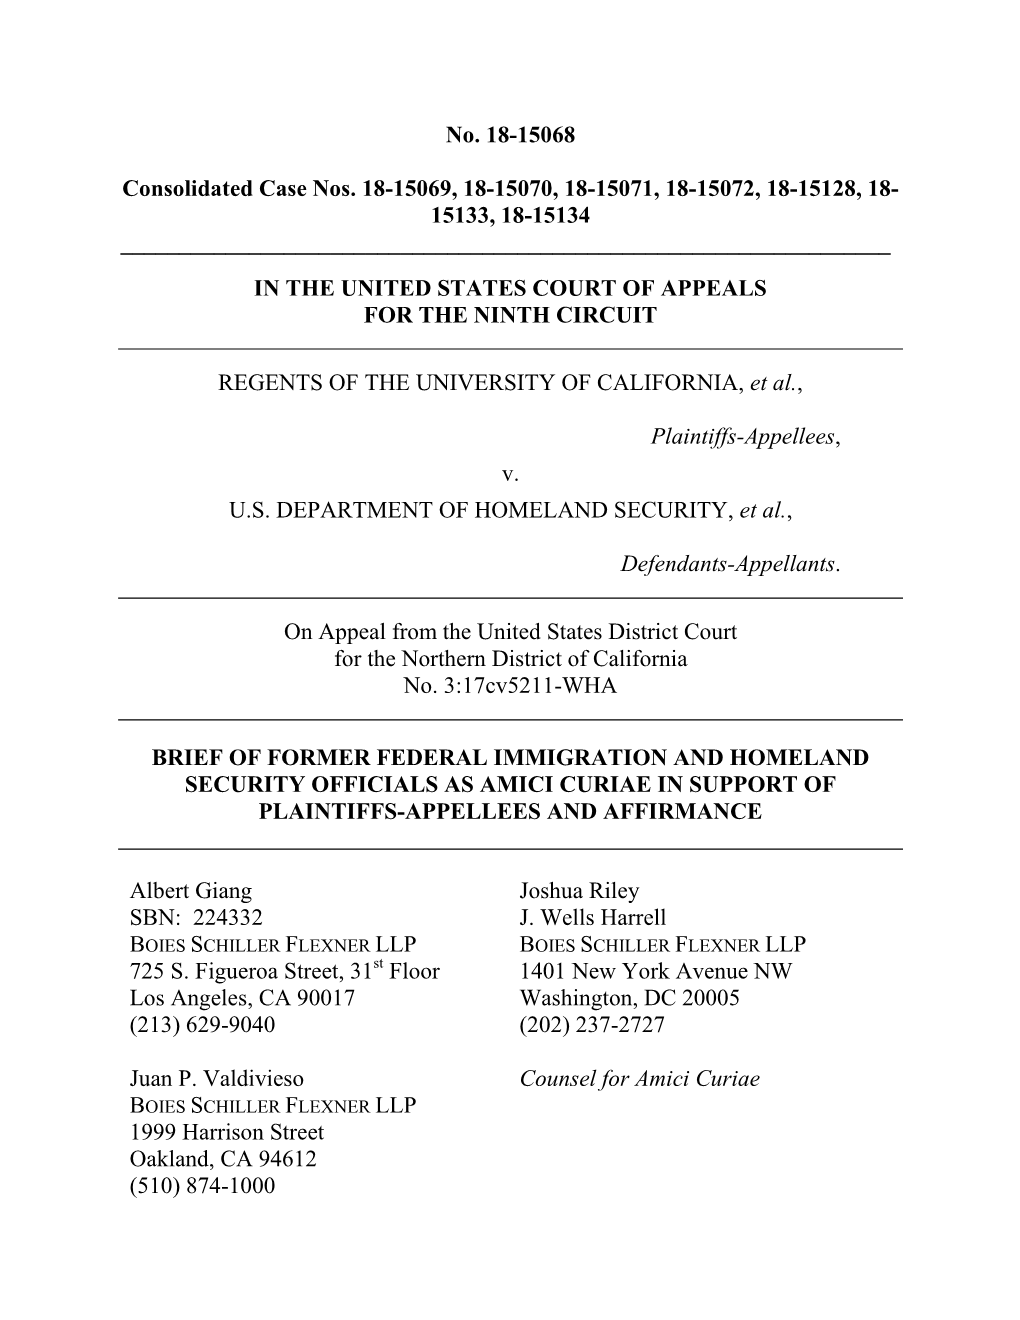 Brief of Former Federal Immigration and Homeland Security Officials As Amici Curiae in Support of Plaintiffs-Appellees and Affirmance